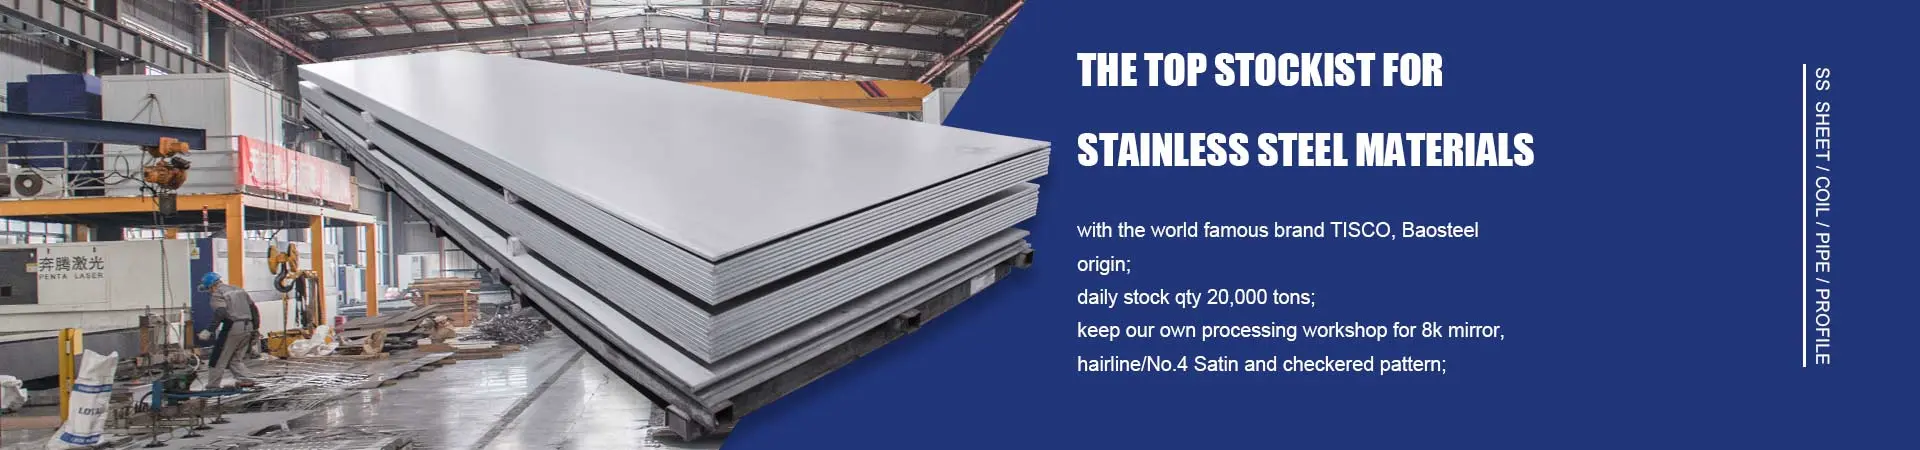 Stainless steel plate stockists with hundreds of tons in stock